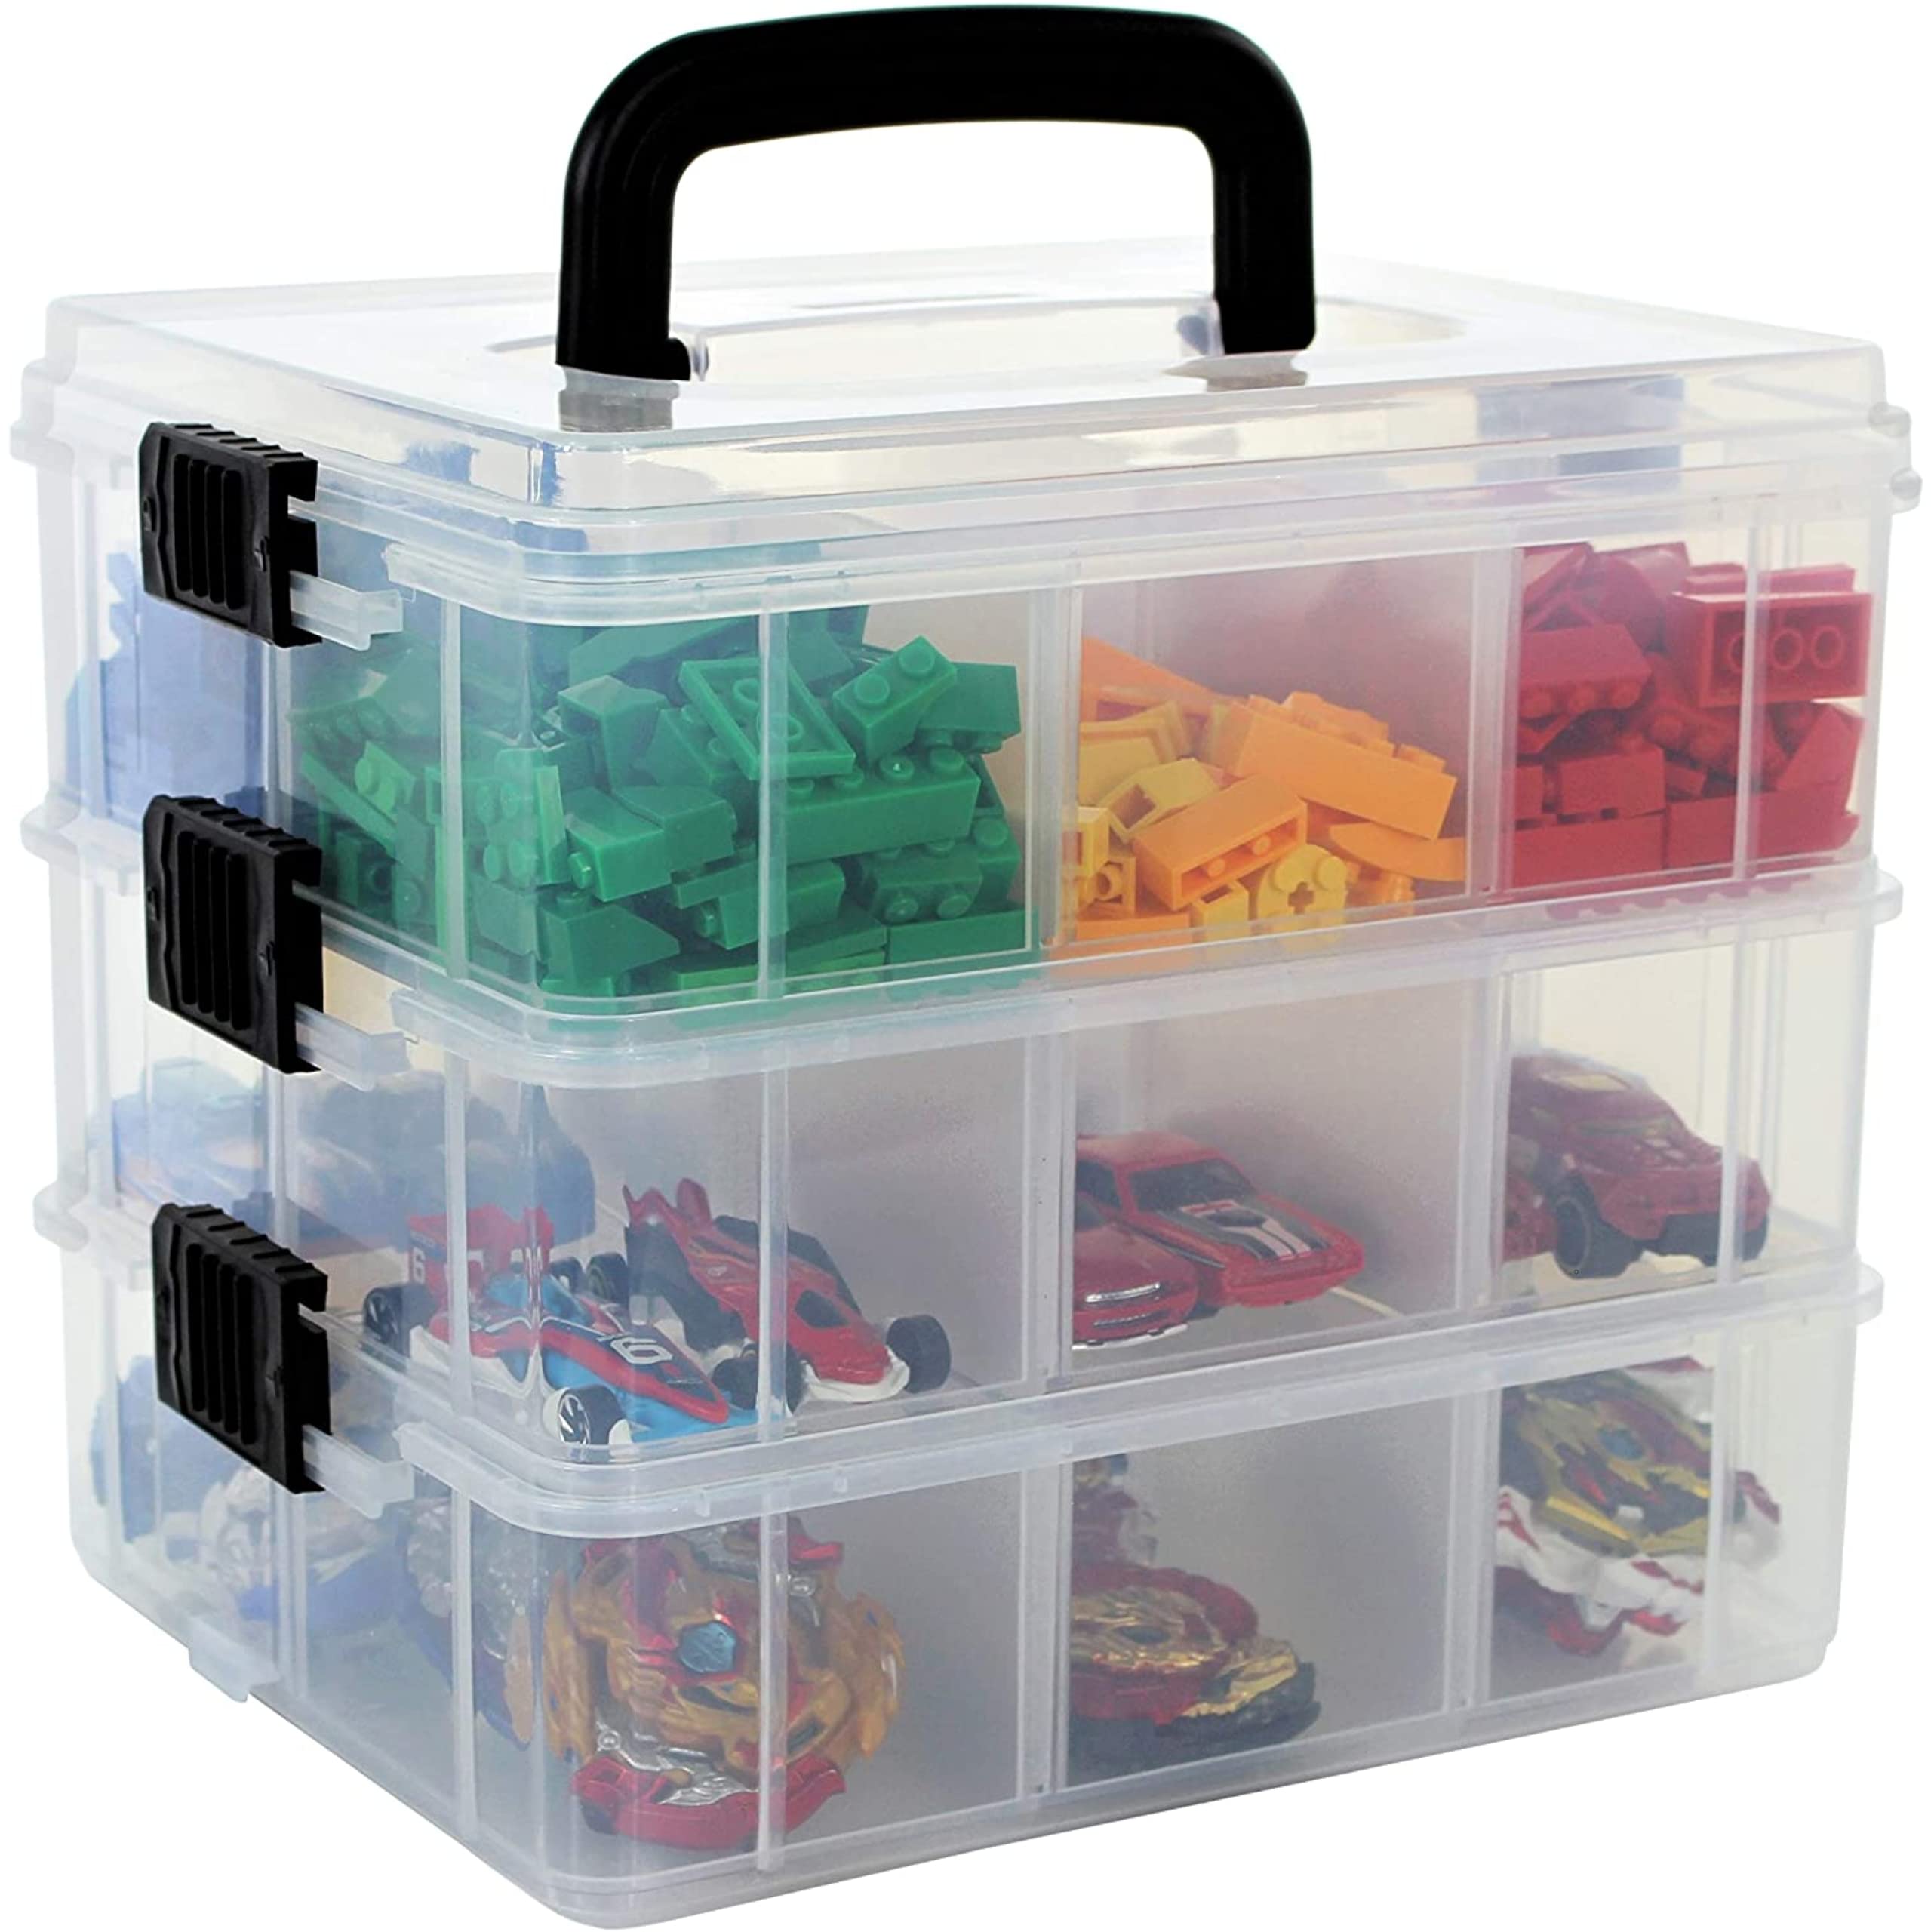 Bins & Things Toy Organizer With 18 Adjustable Compartments Compatible with  Calico Critter, Hot Wheels, Lego Storage Organizer